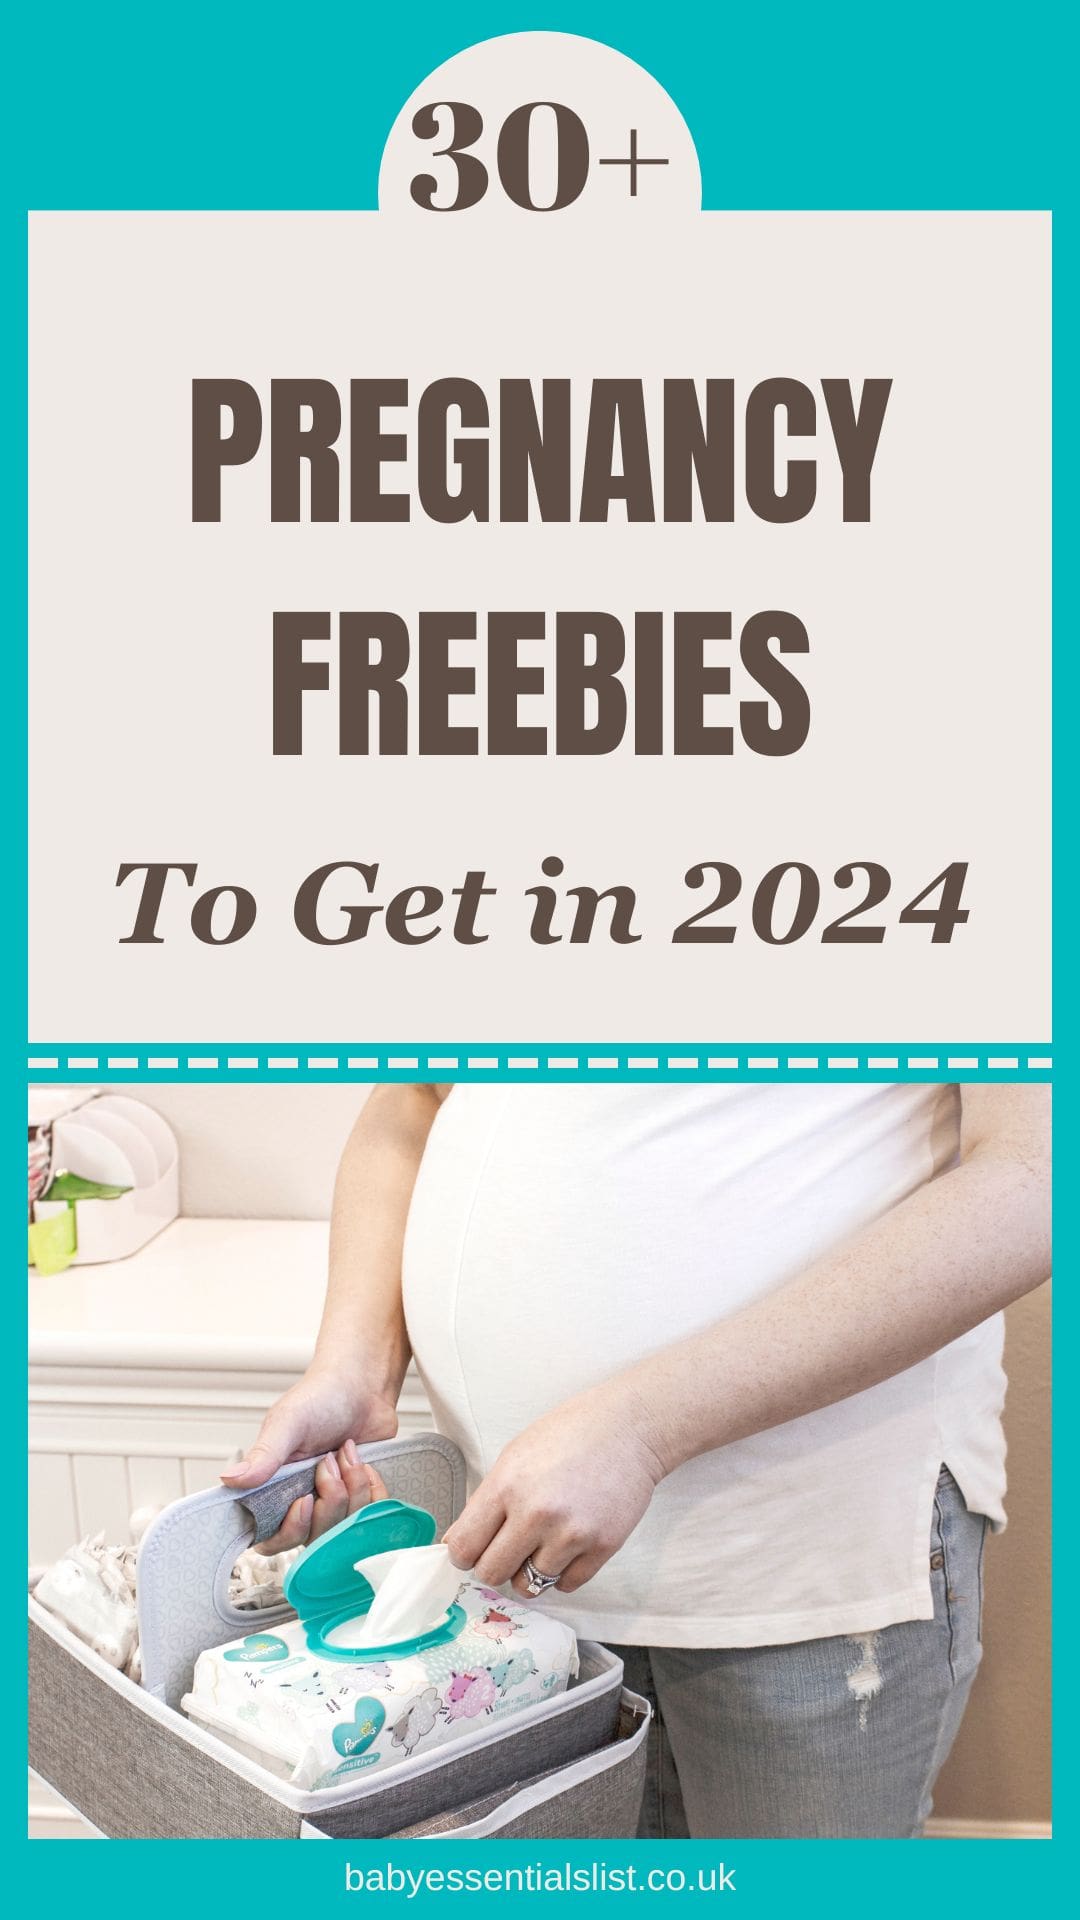 Pregnancy freebies to get in 2024